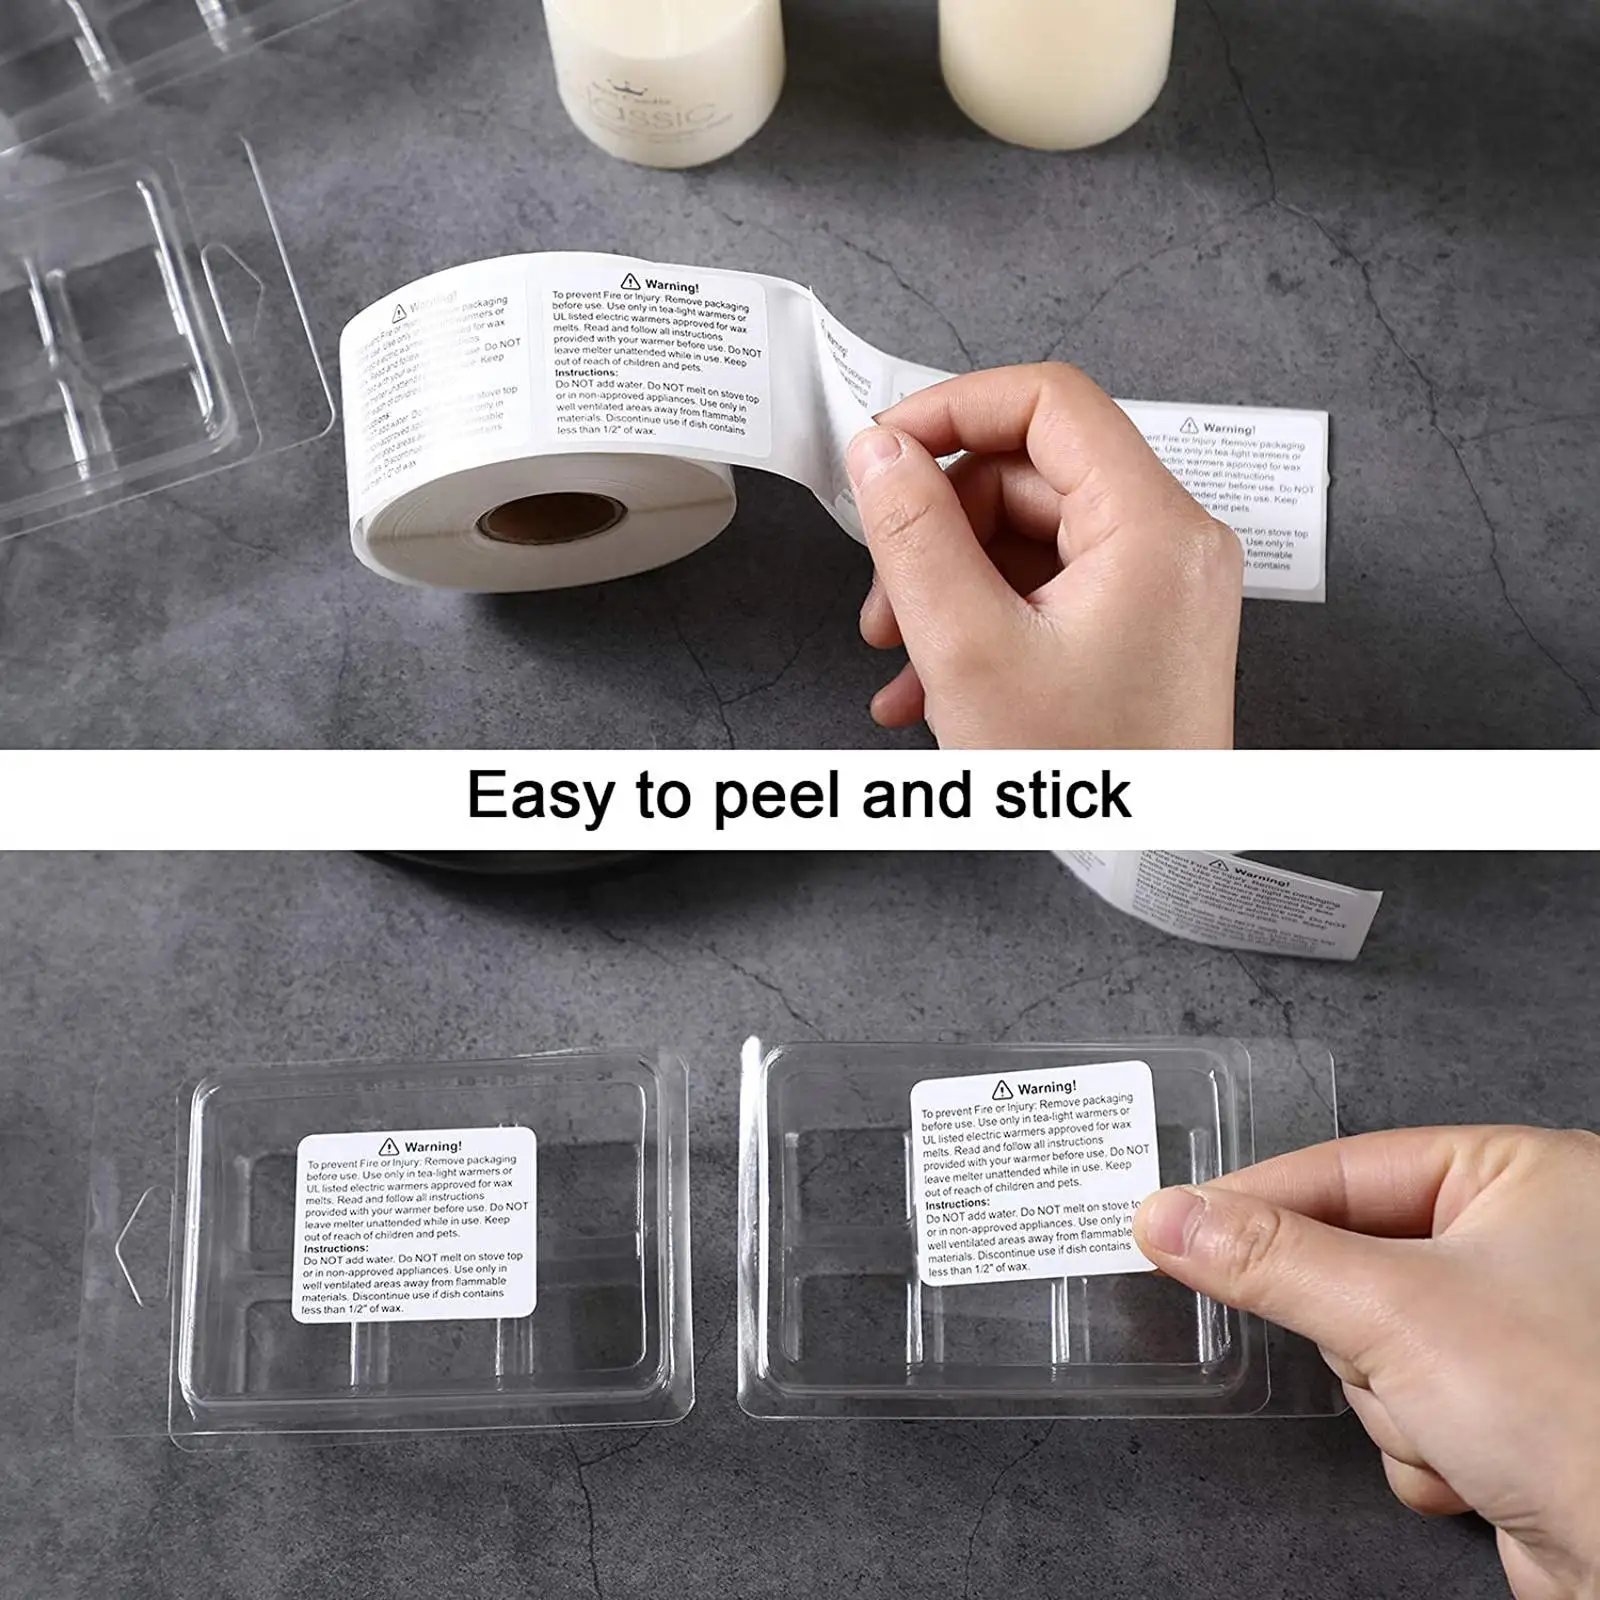 600pcs/roll Waterproof Candle Jar Warning Labels Melting Safety Stickers Decals for Candle Making